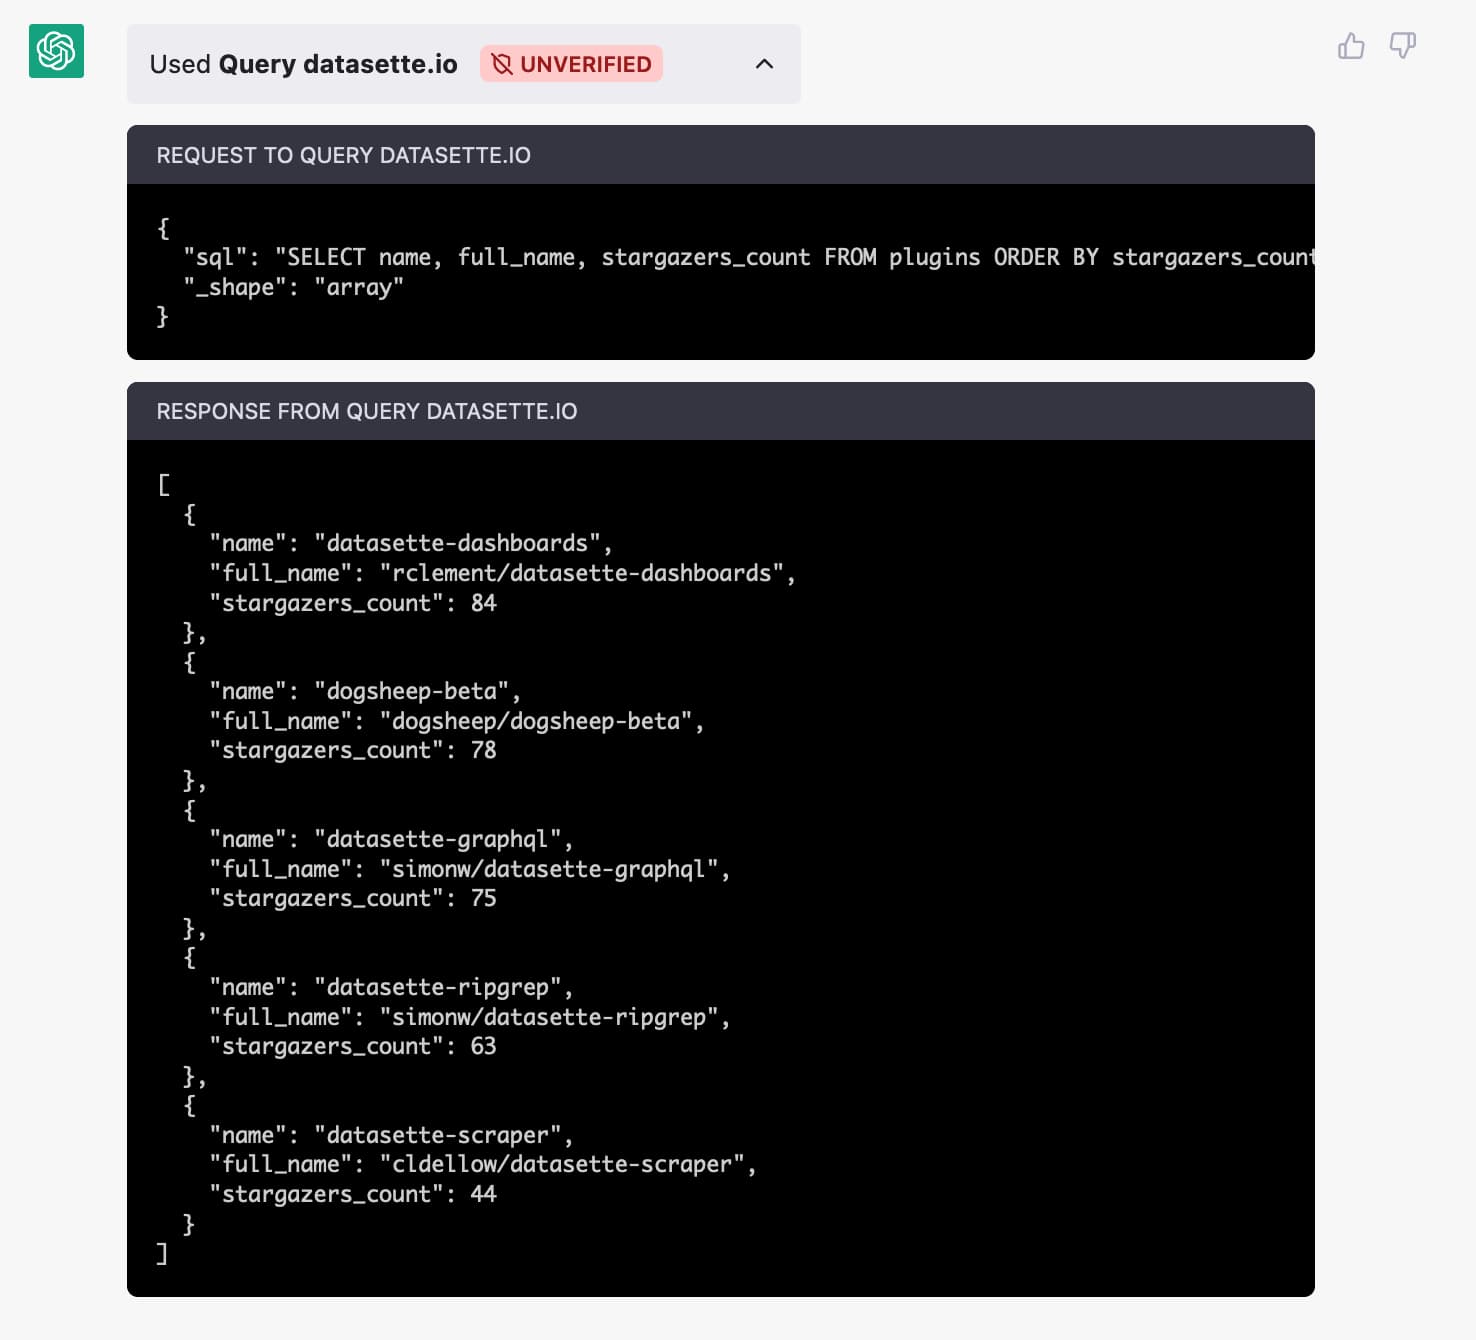 Used query datasette.io expanded - shows JSON for the query and the returned response